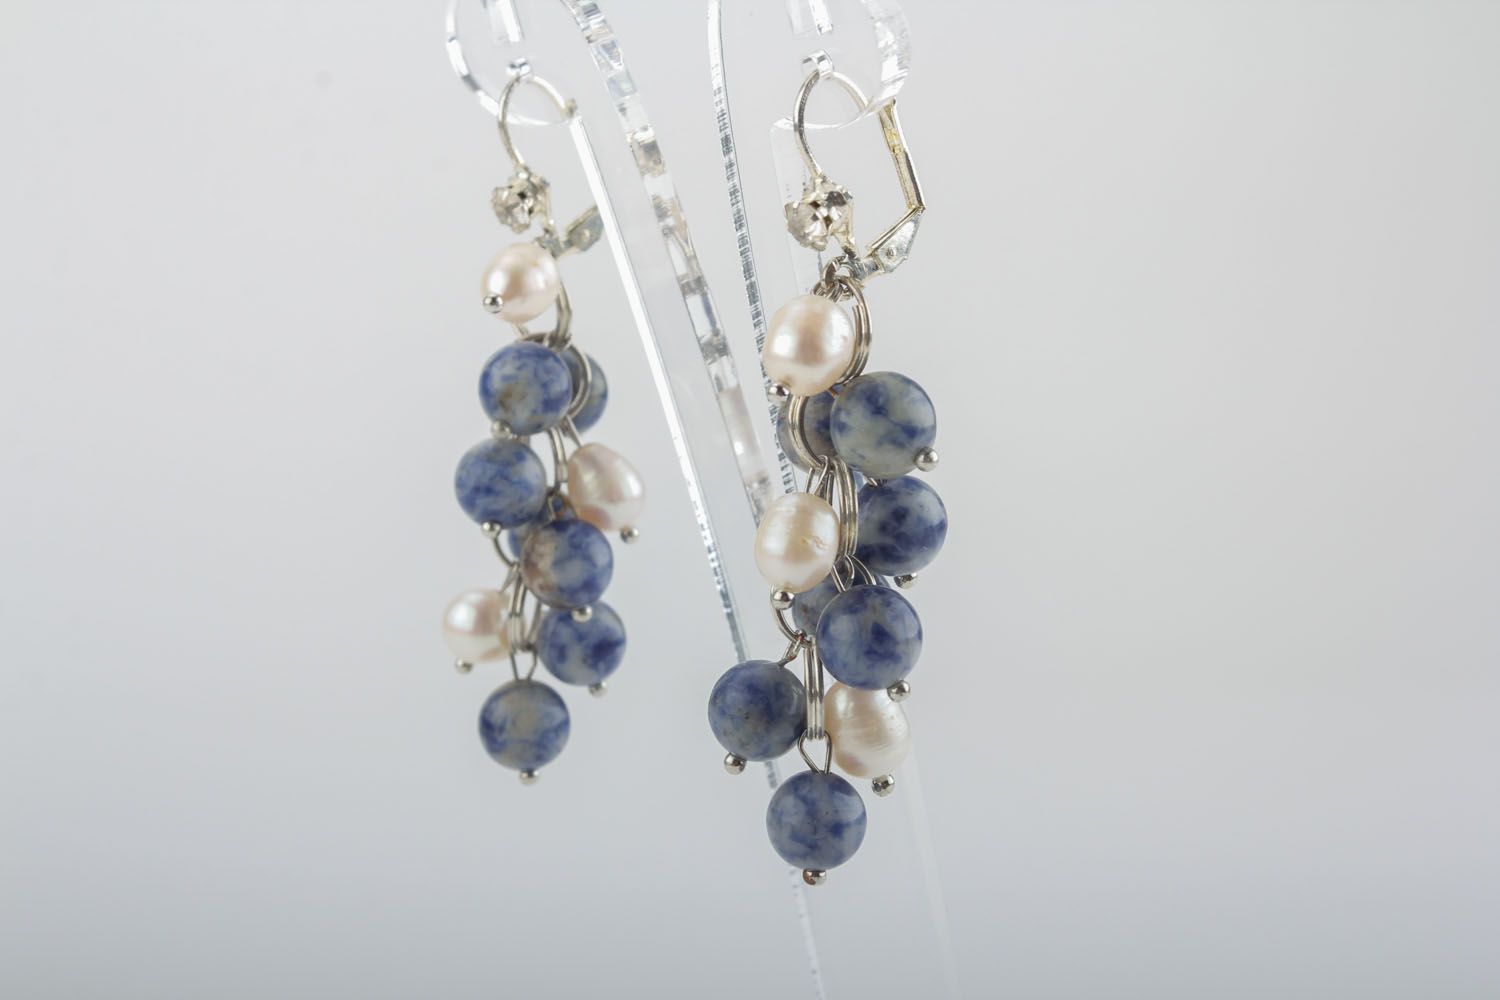 Earrings with natural stone charms photo 2